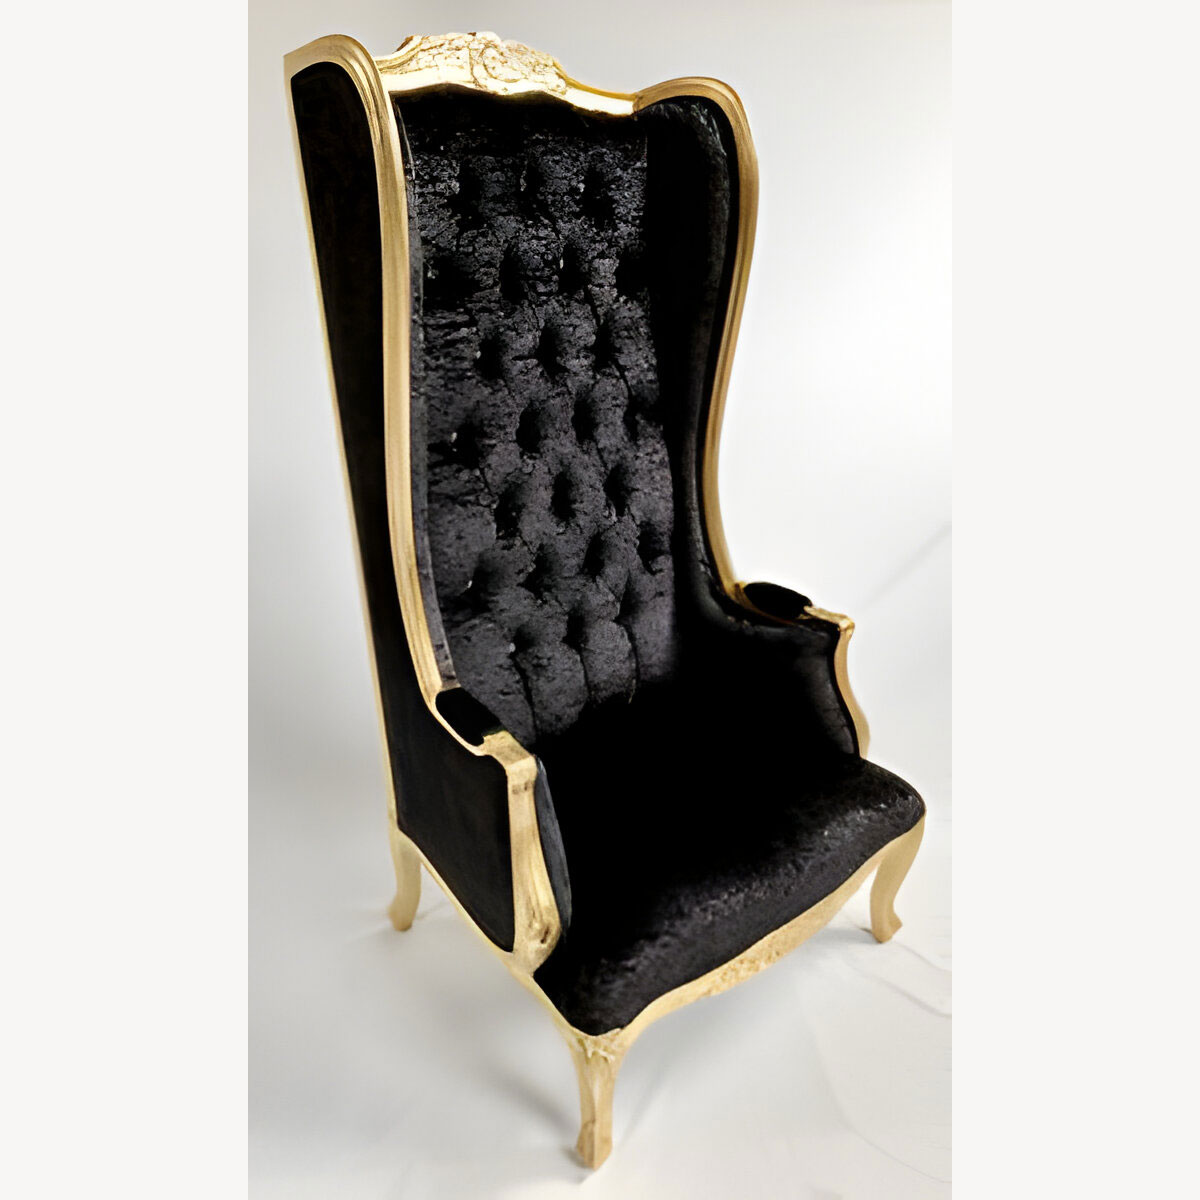 Gold Ornate High Back Porters Arm Chair In Black Crushed Velvet With Crystals 4 - Hampshire Barn Interiors - Gold Ornate High Back Porters Arm Chair In Black Crushed Velvet With Crystals -